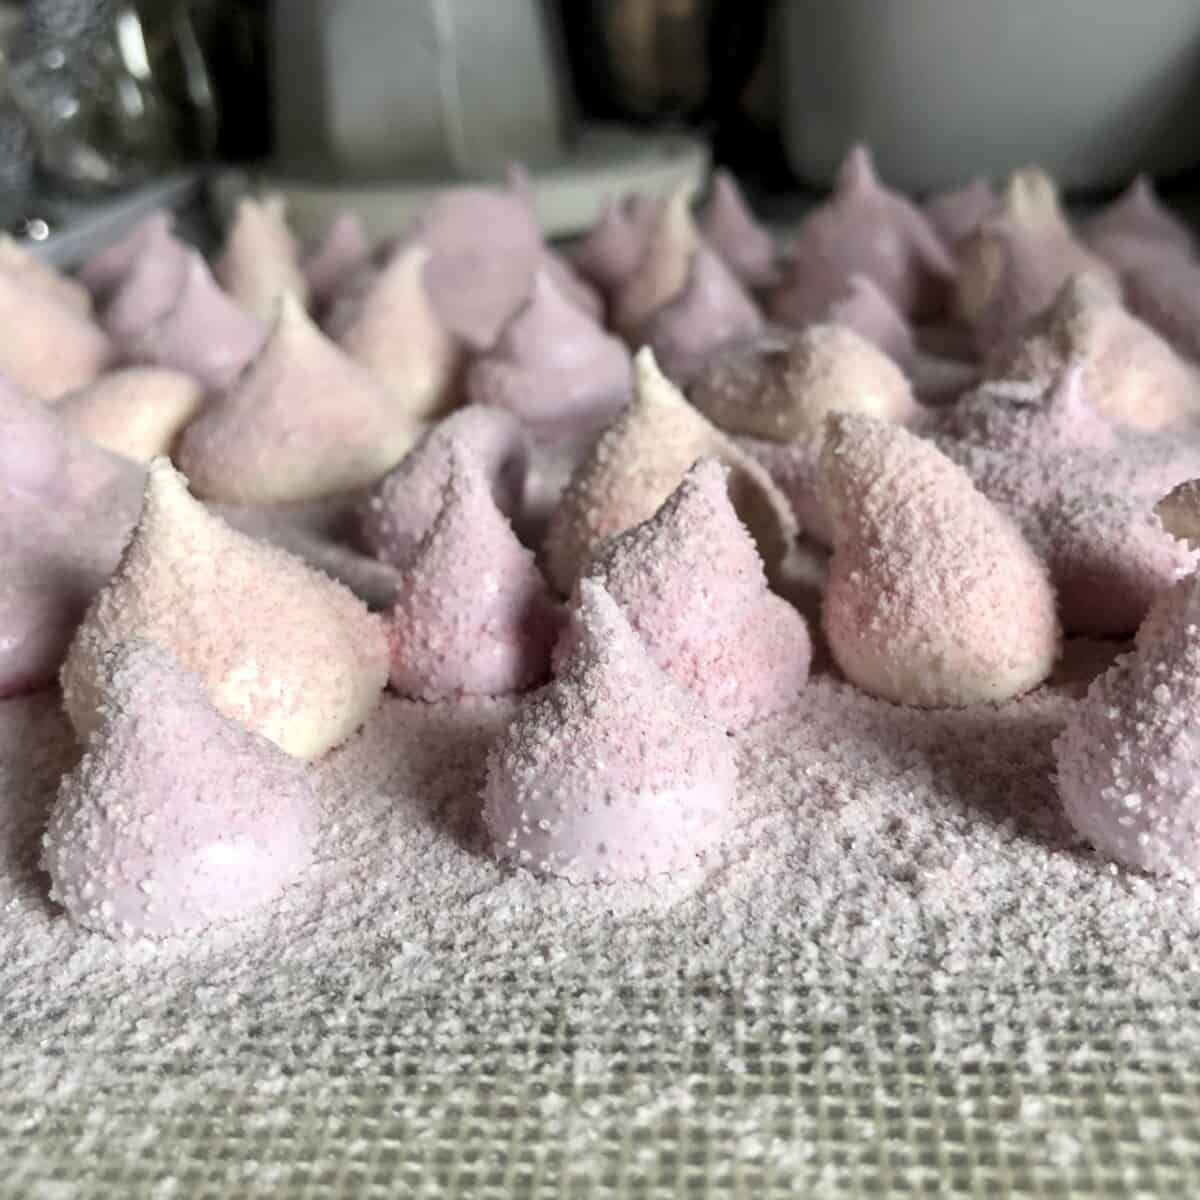 sparkly lavender and white drop-shaped piped marshmallows on a dusted baking tray that have been dusted with coarse sanding sugar and a powdered sugar and cornstarch mixture.